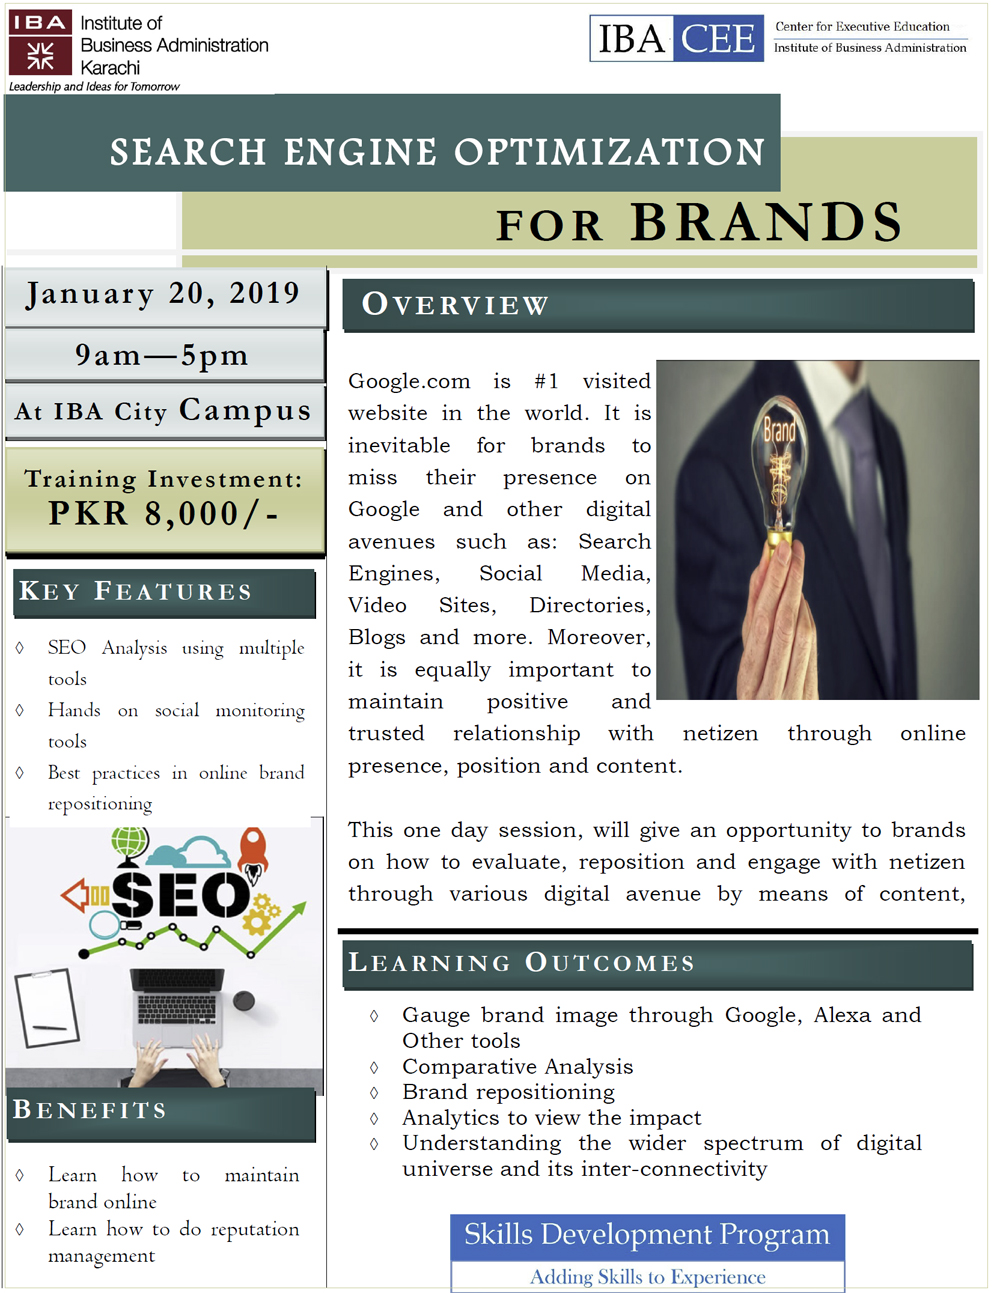 Search Engine Optimization for Brands